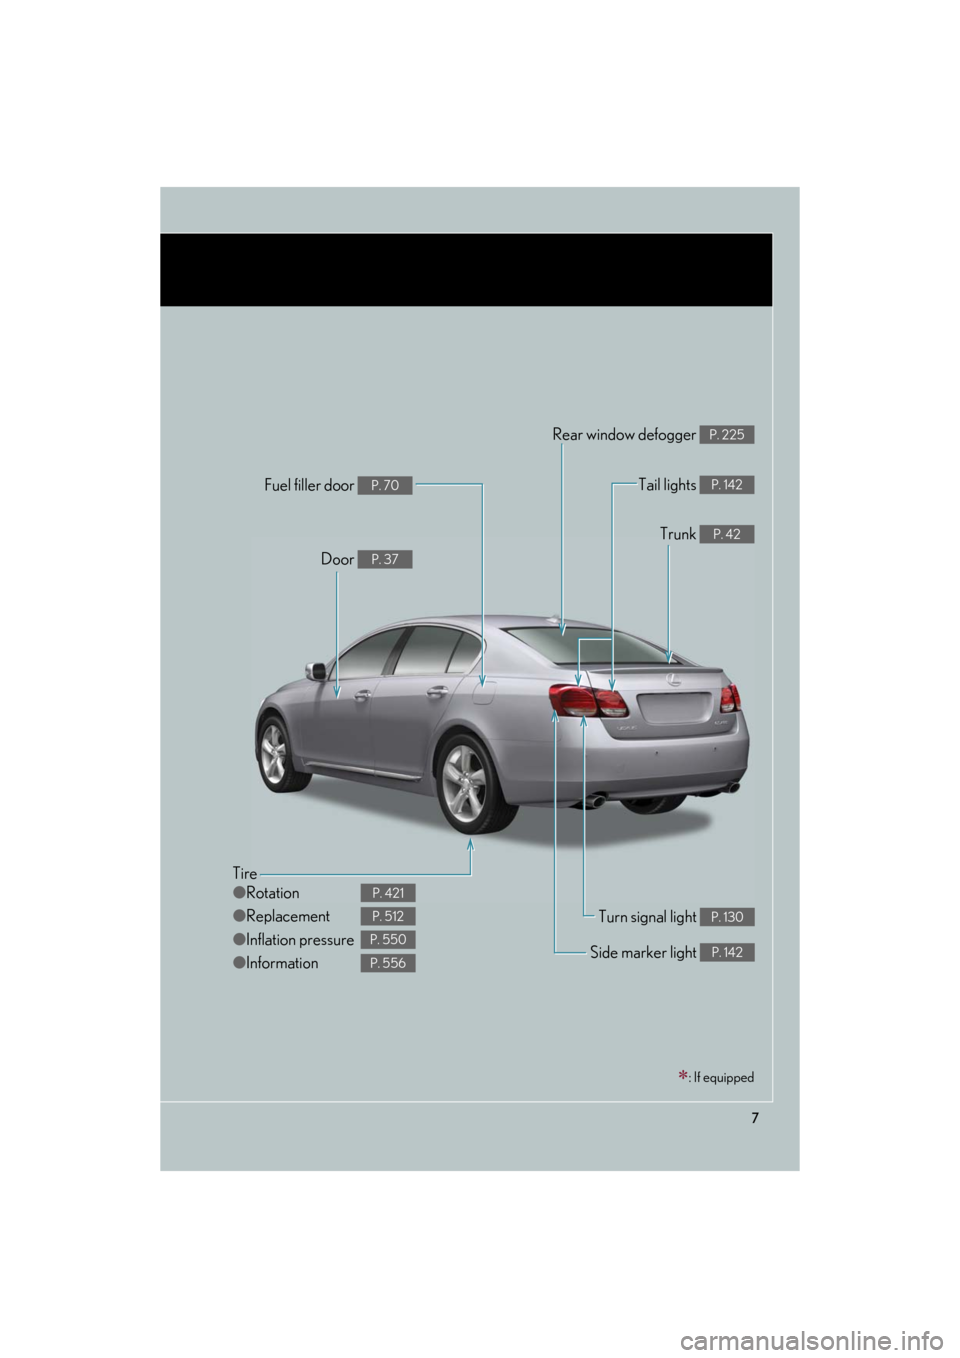 Lexus GS350 2008  Specifications / LEXUS 2008 GS460/350 OWNERS MANUAL (OM30A87U) 7
GS_G_U
May 13, 2008 5:14 pm
Tire
●Rotation
● Replacement
● Inflation pressure
● Information
P. 421
P. 512
P. 550
P. 556
Tail lights P. 142
Side marker light P. 142
Trunk P. 42
Rear window de